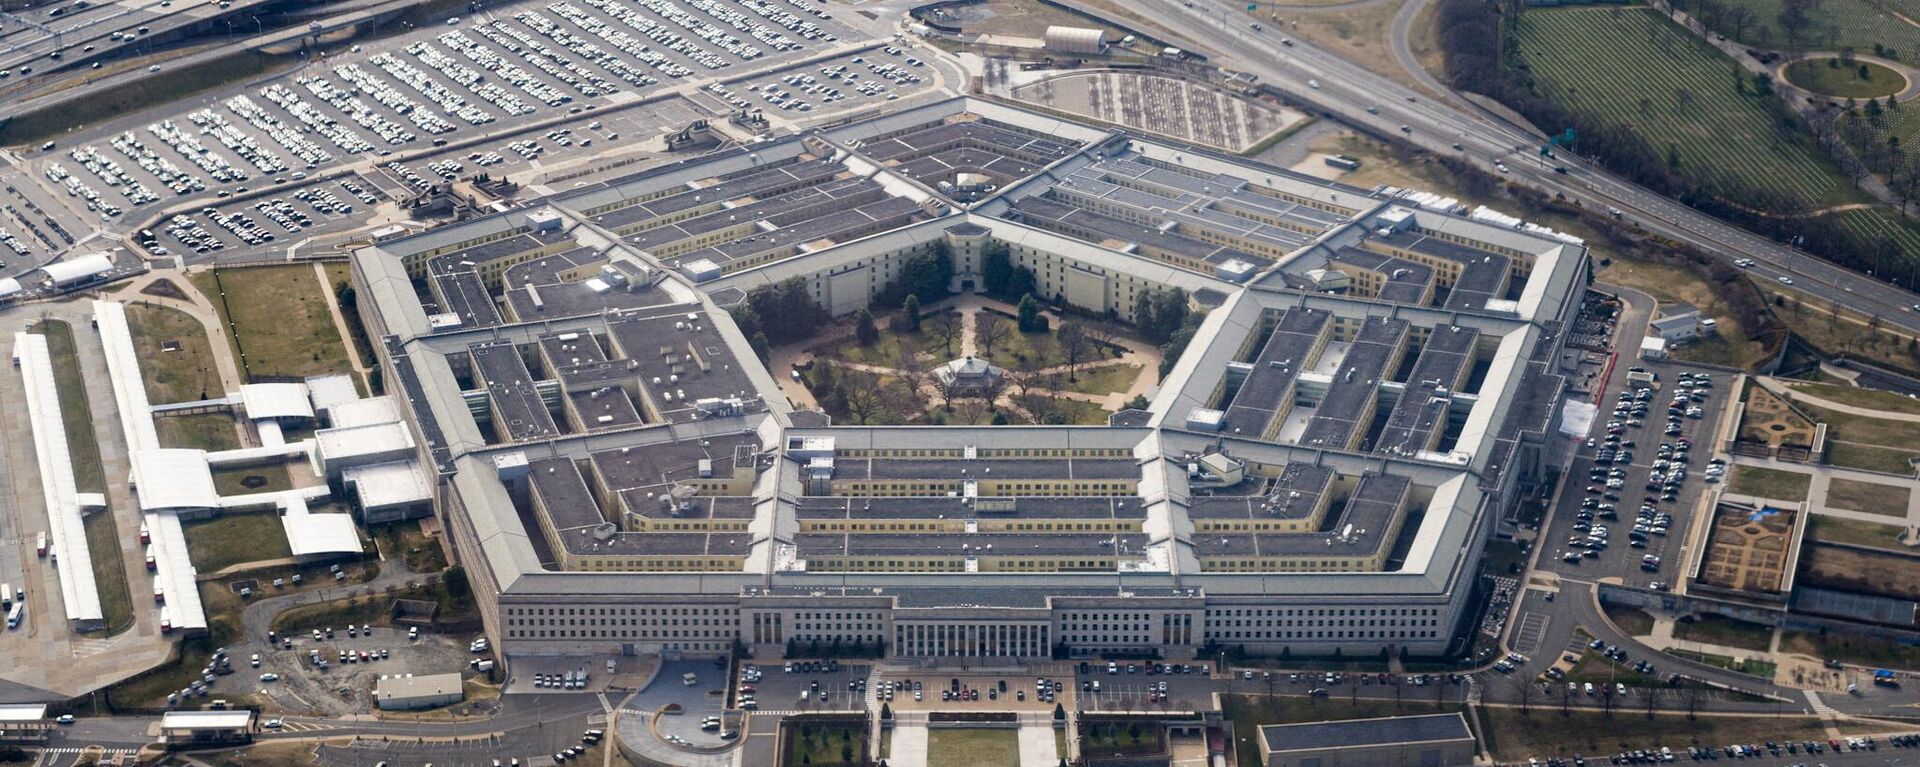 The Pentagon is seen from the air in Washington, U.S., March 3, 2022, more than a week after Russia invaded Ukraine. - Sputnik International, 1920, 28.03.2022